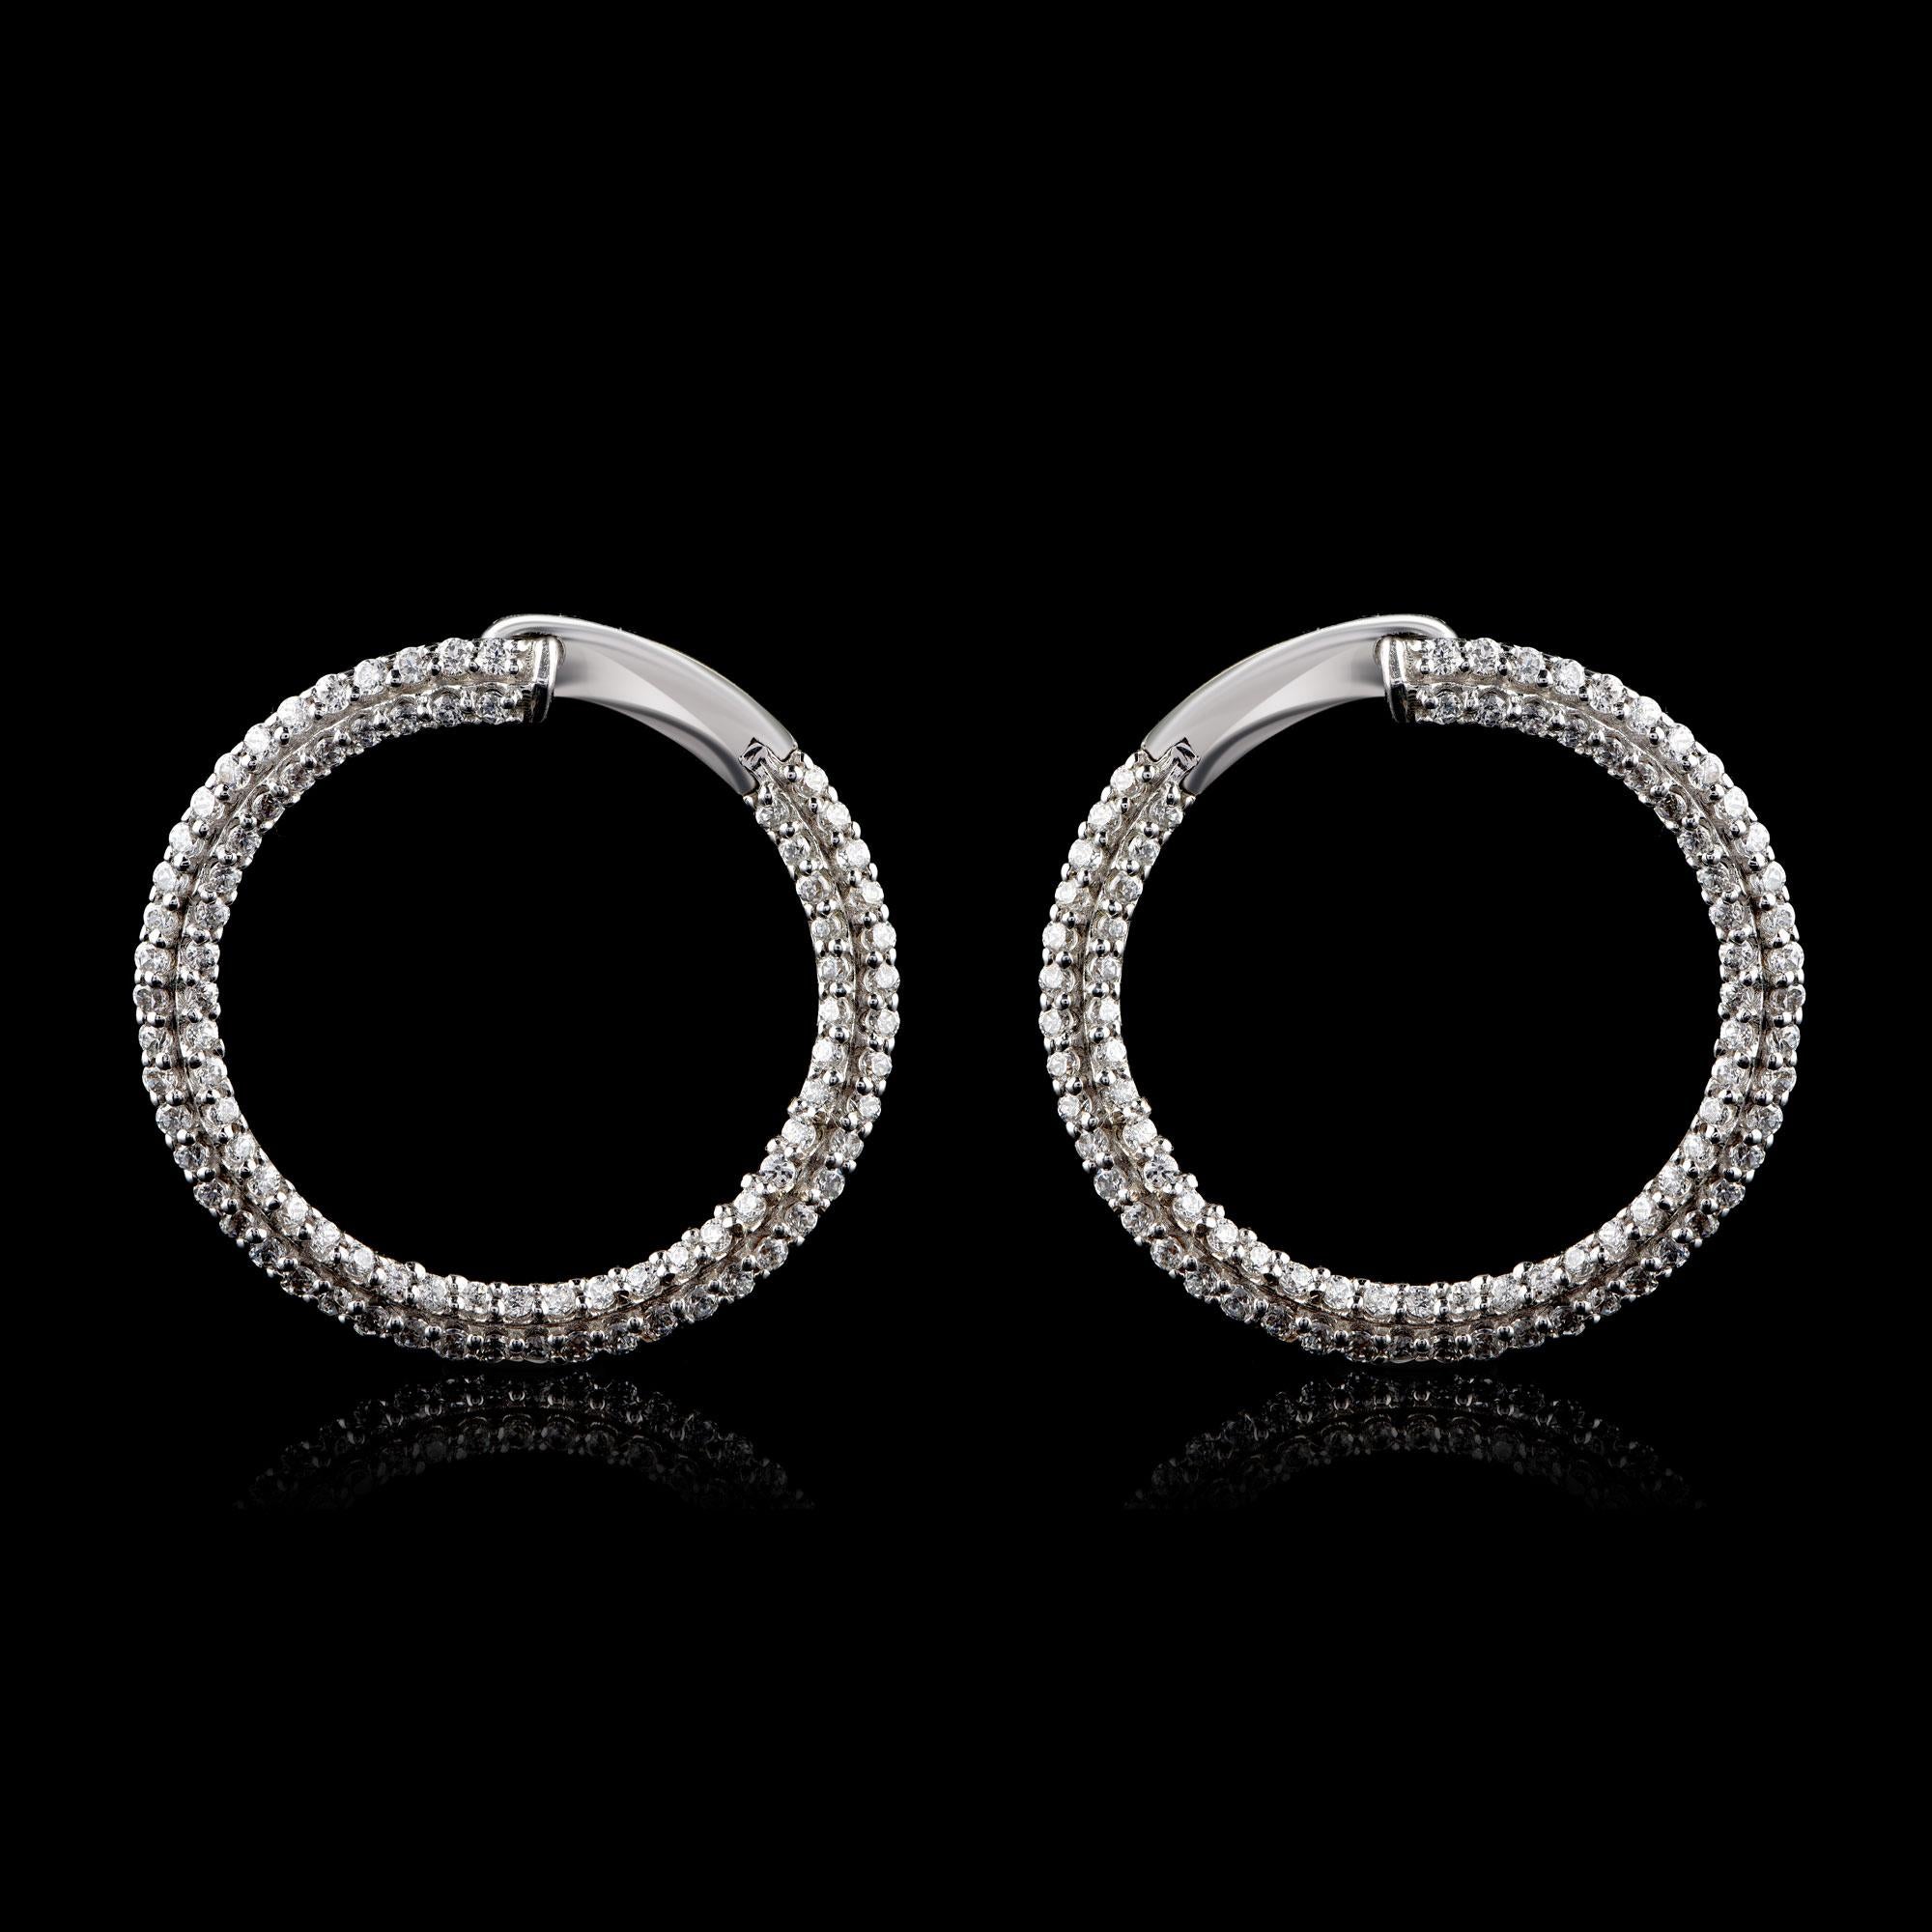 These hoop earrings are embedded with 172 brilliant-cut diamonds in prong setting and hand-crafted in 18-karat white gold. The diamonds are graded H-I Color, I2 Clarity.